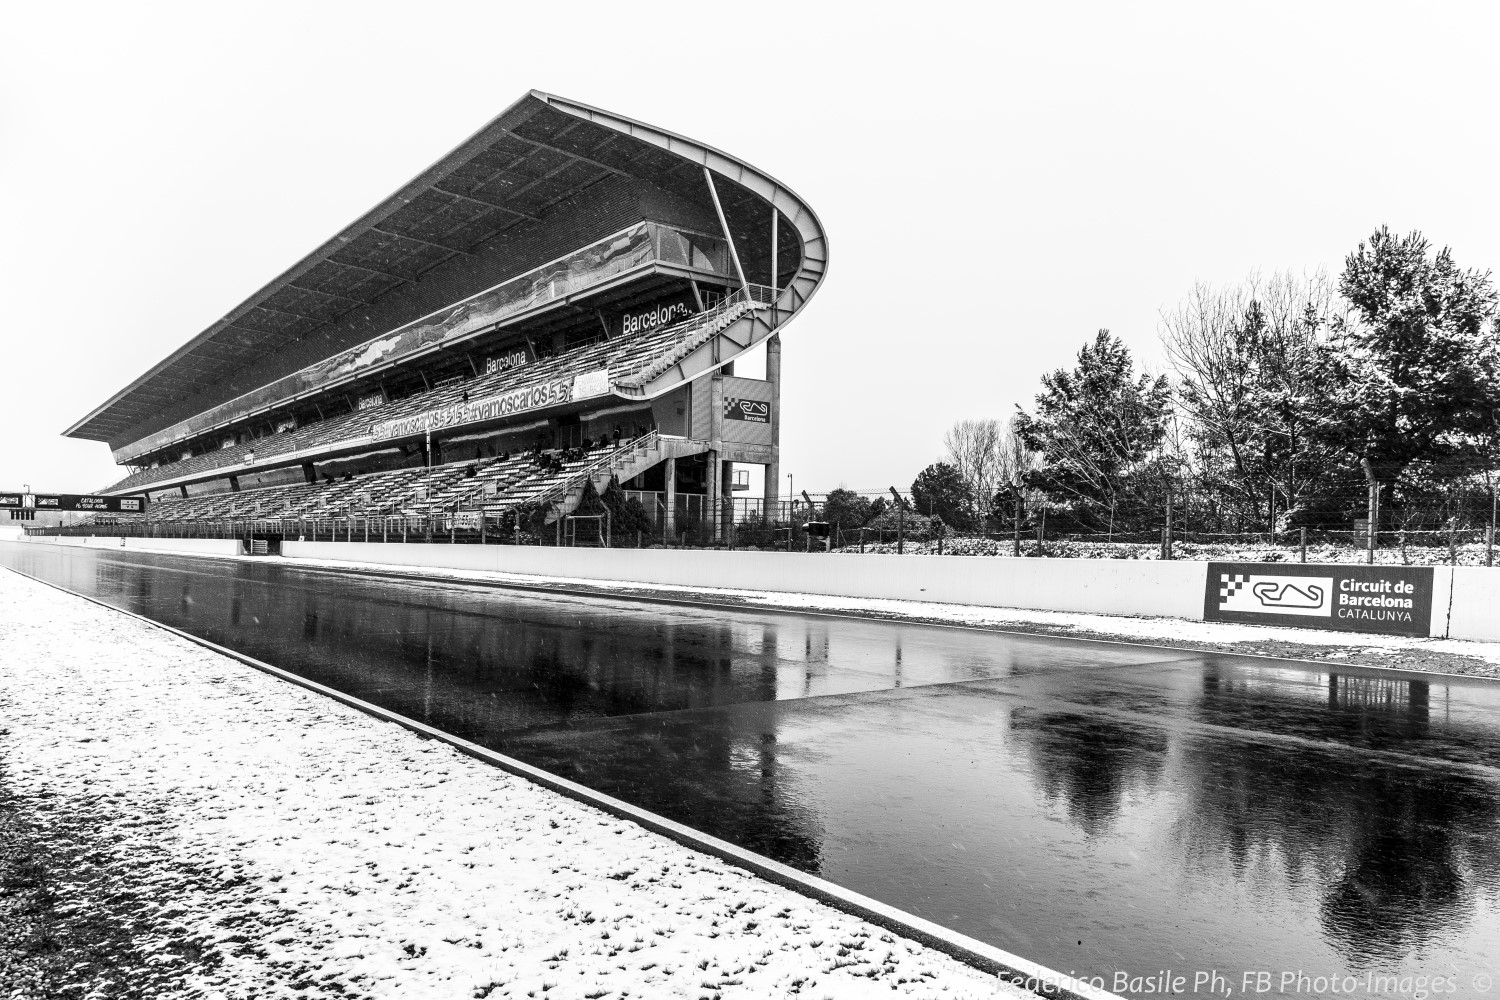 Barcelona when it snowed during winter testing